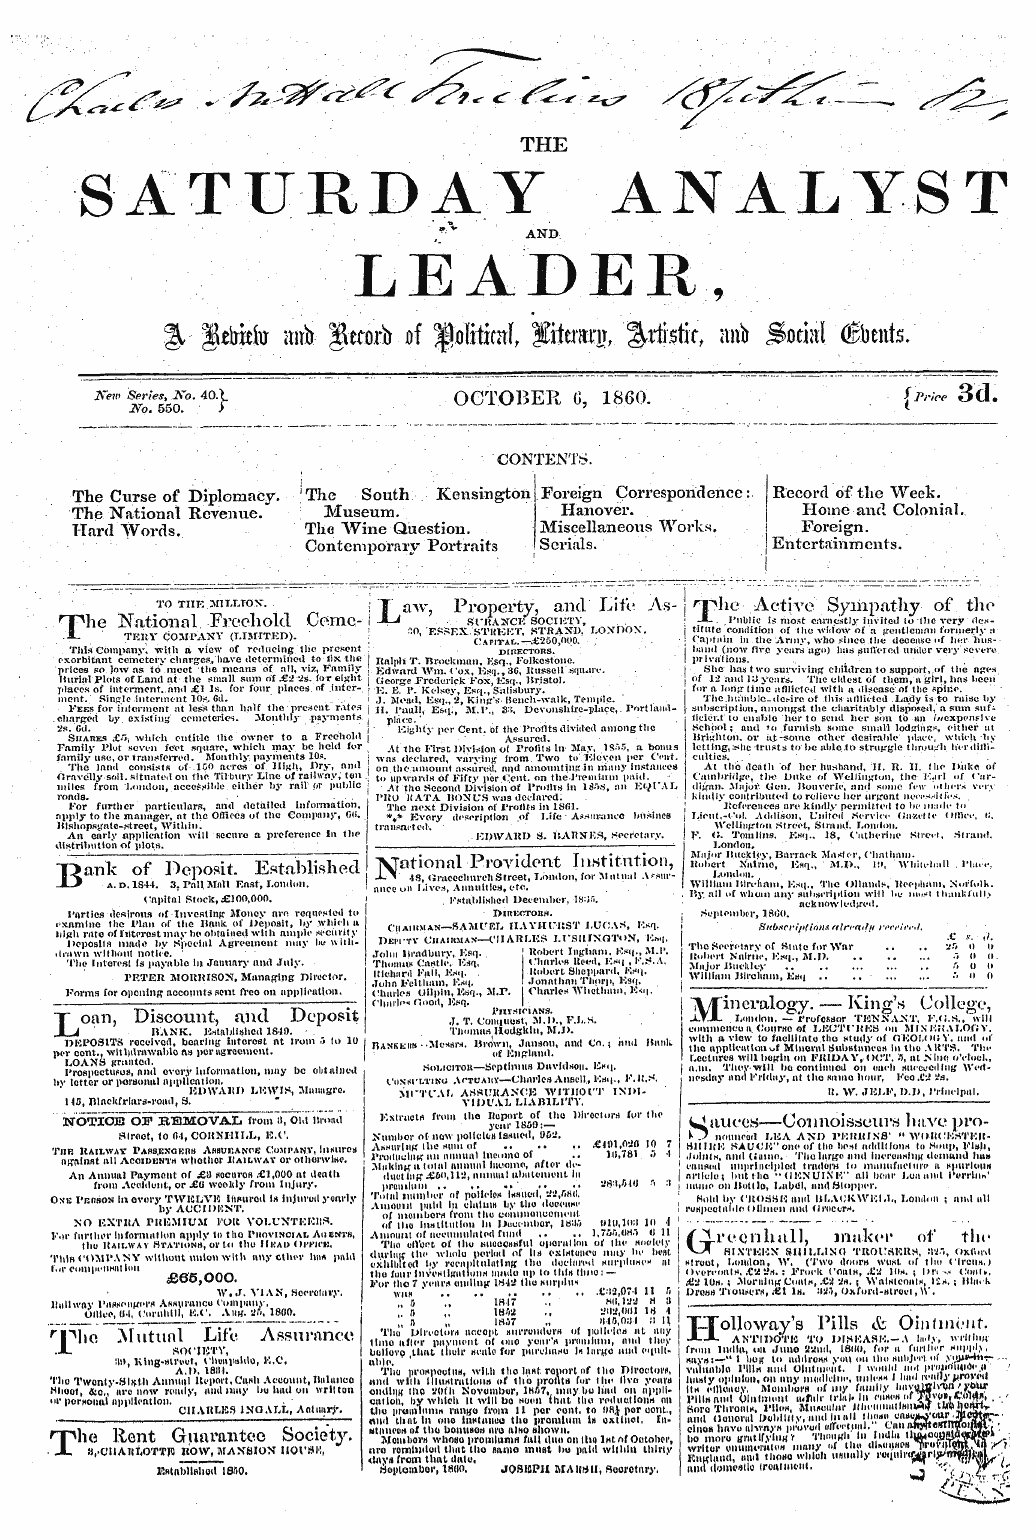 Leader (1850-1860): jS F Y, 2nd edition - Ad00111